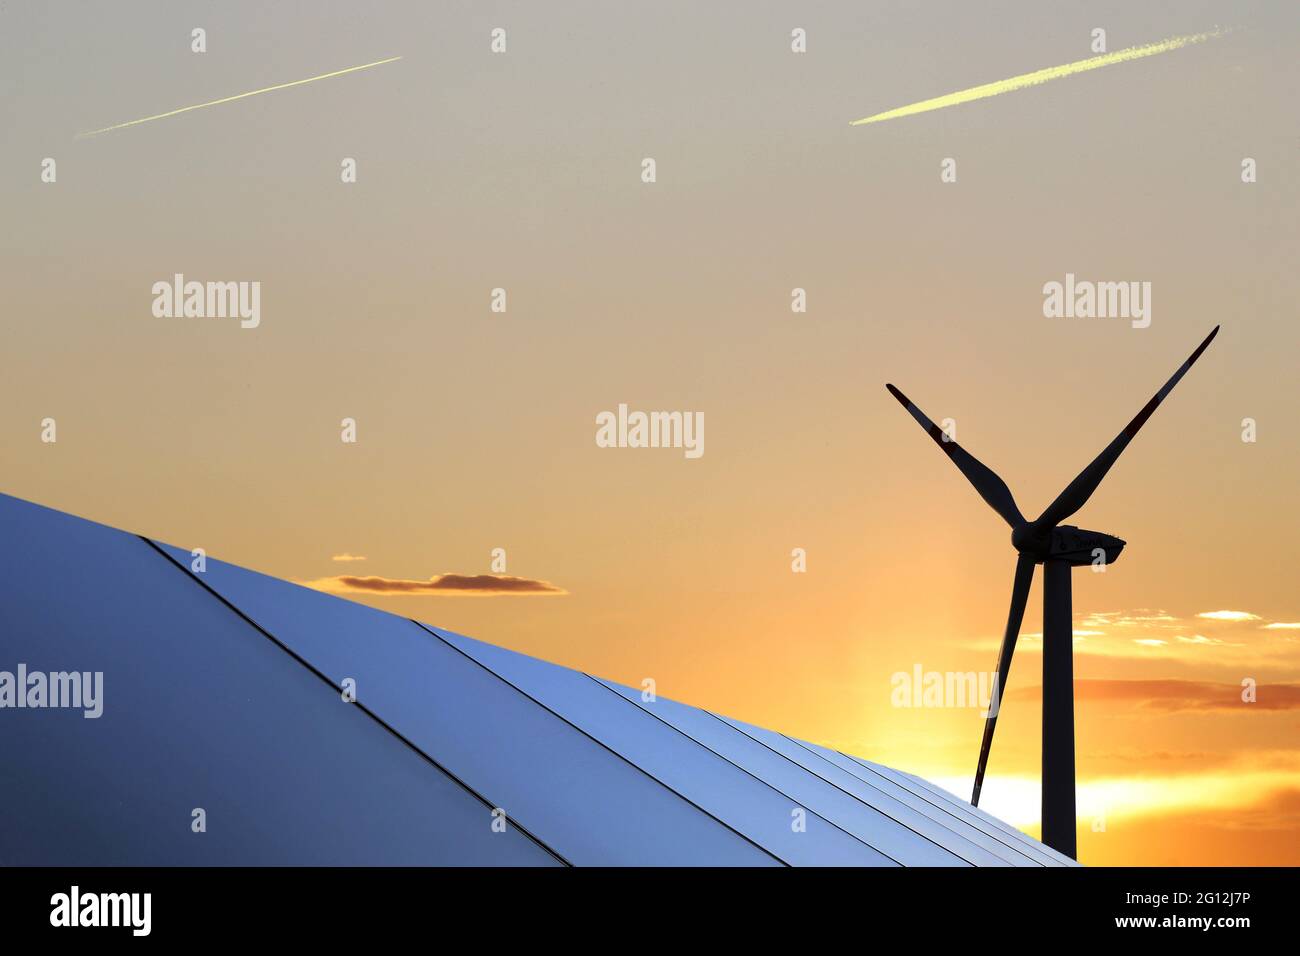 Symbol image: Solar park with wind turbines in the background. Stock Photo